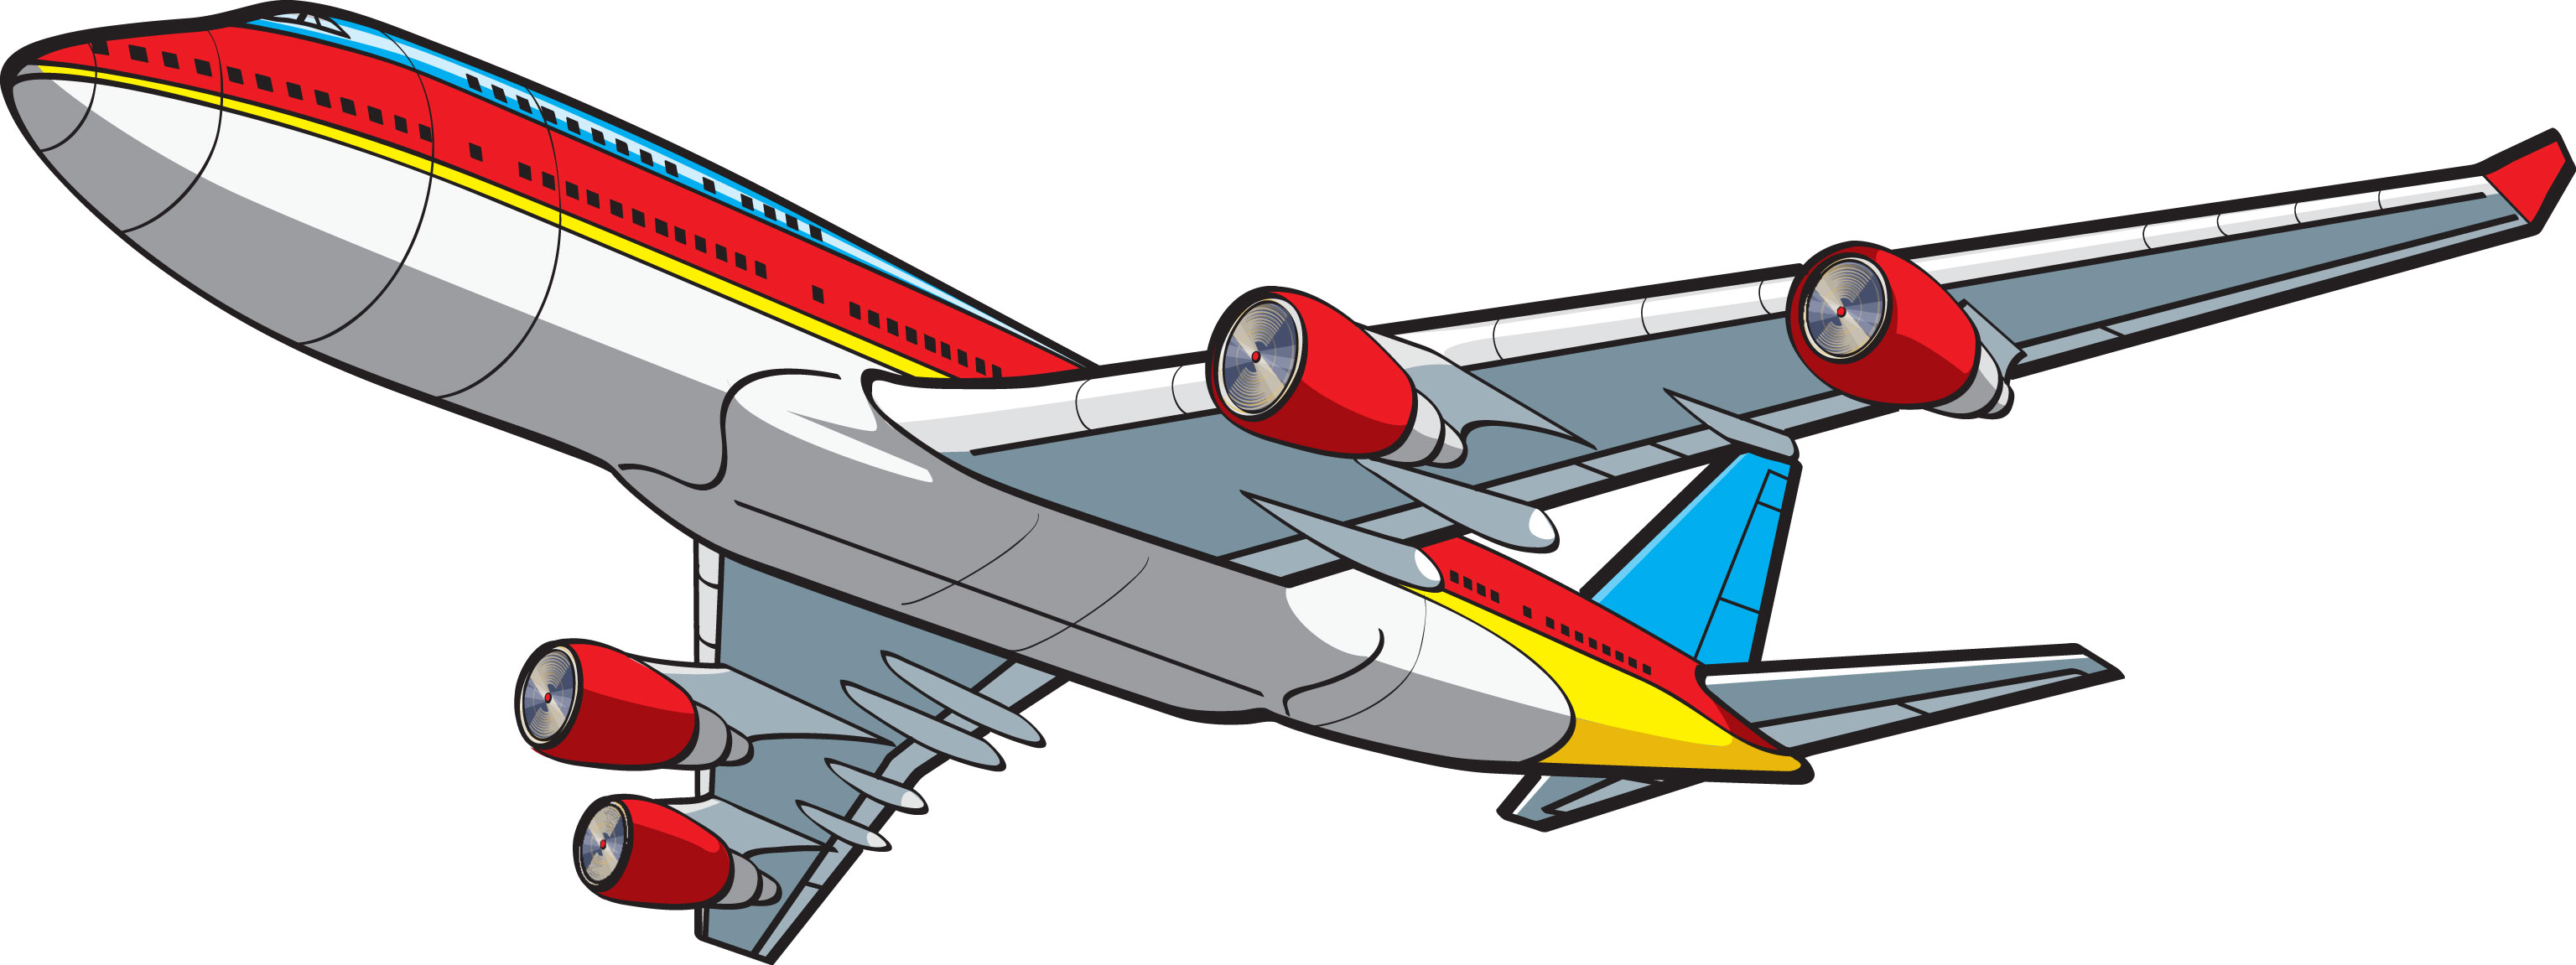 clipart plane flying - photo #40